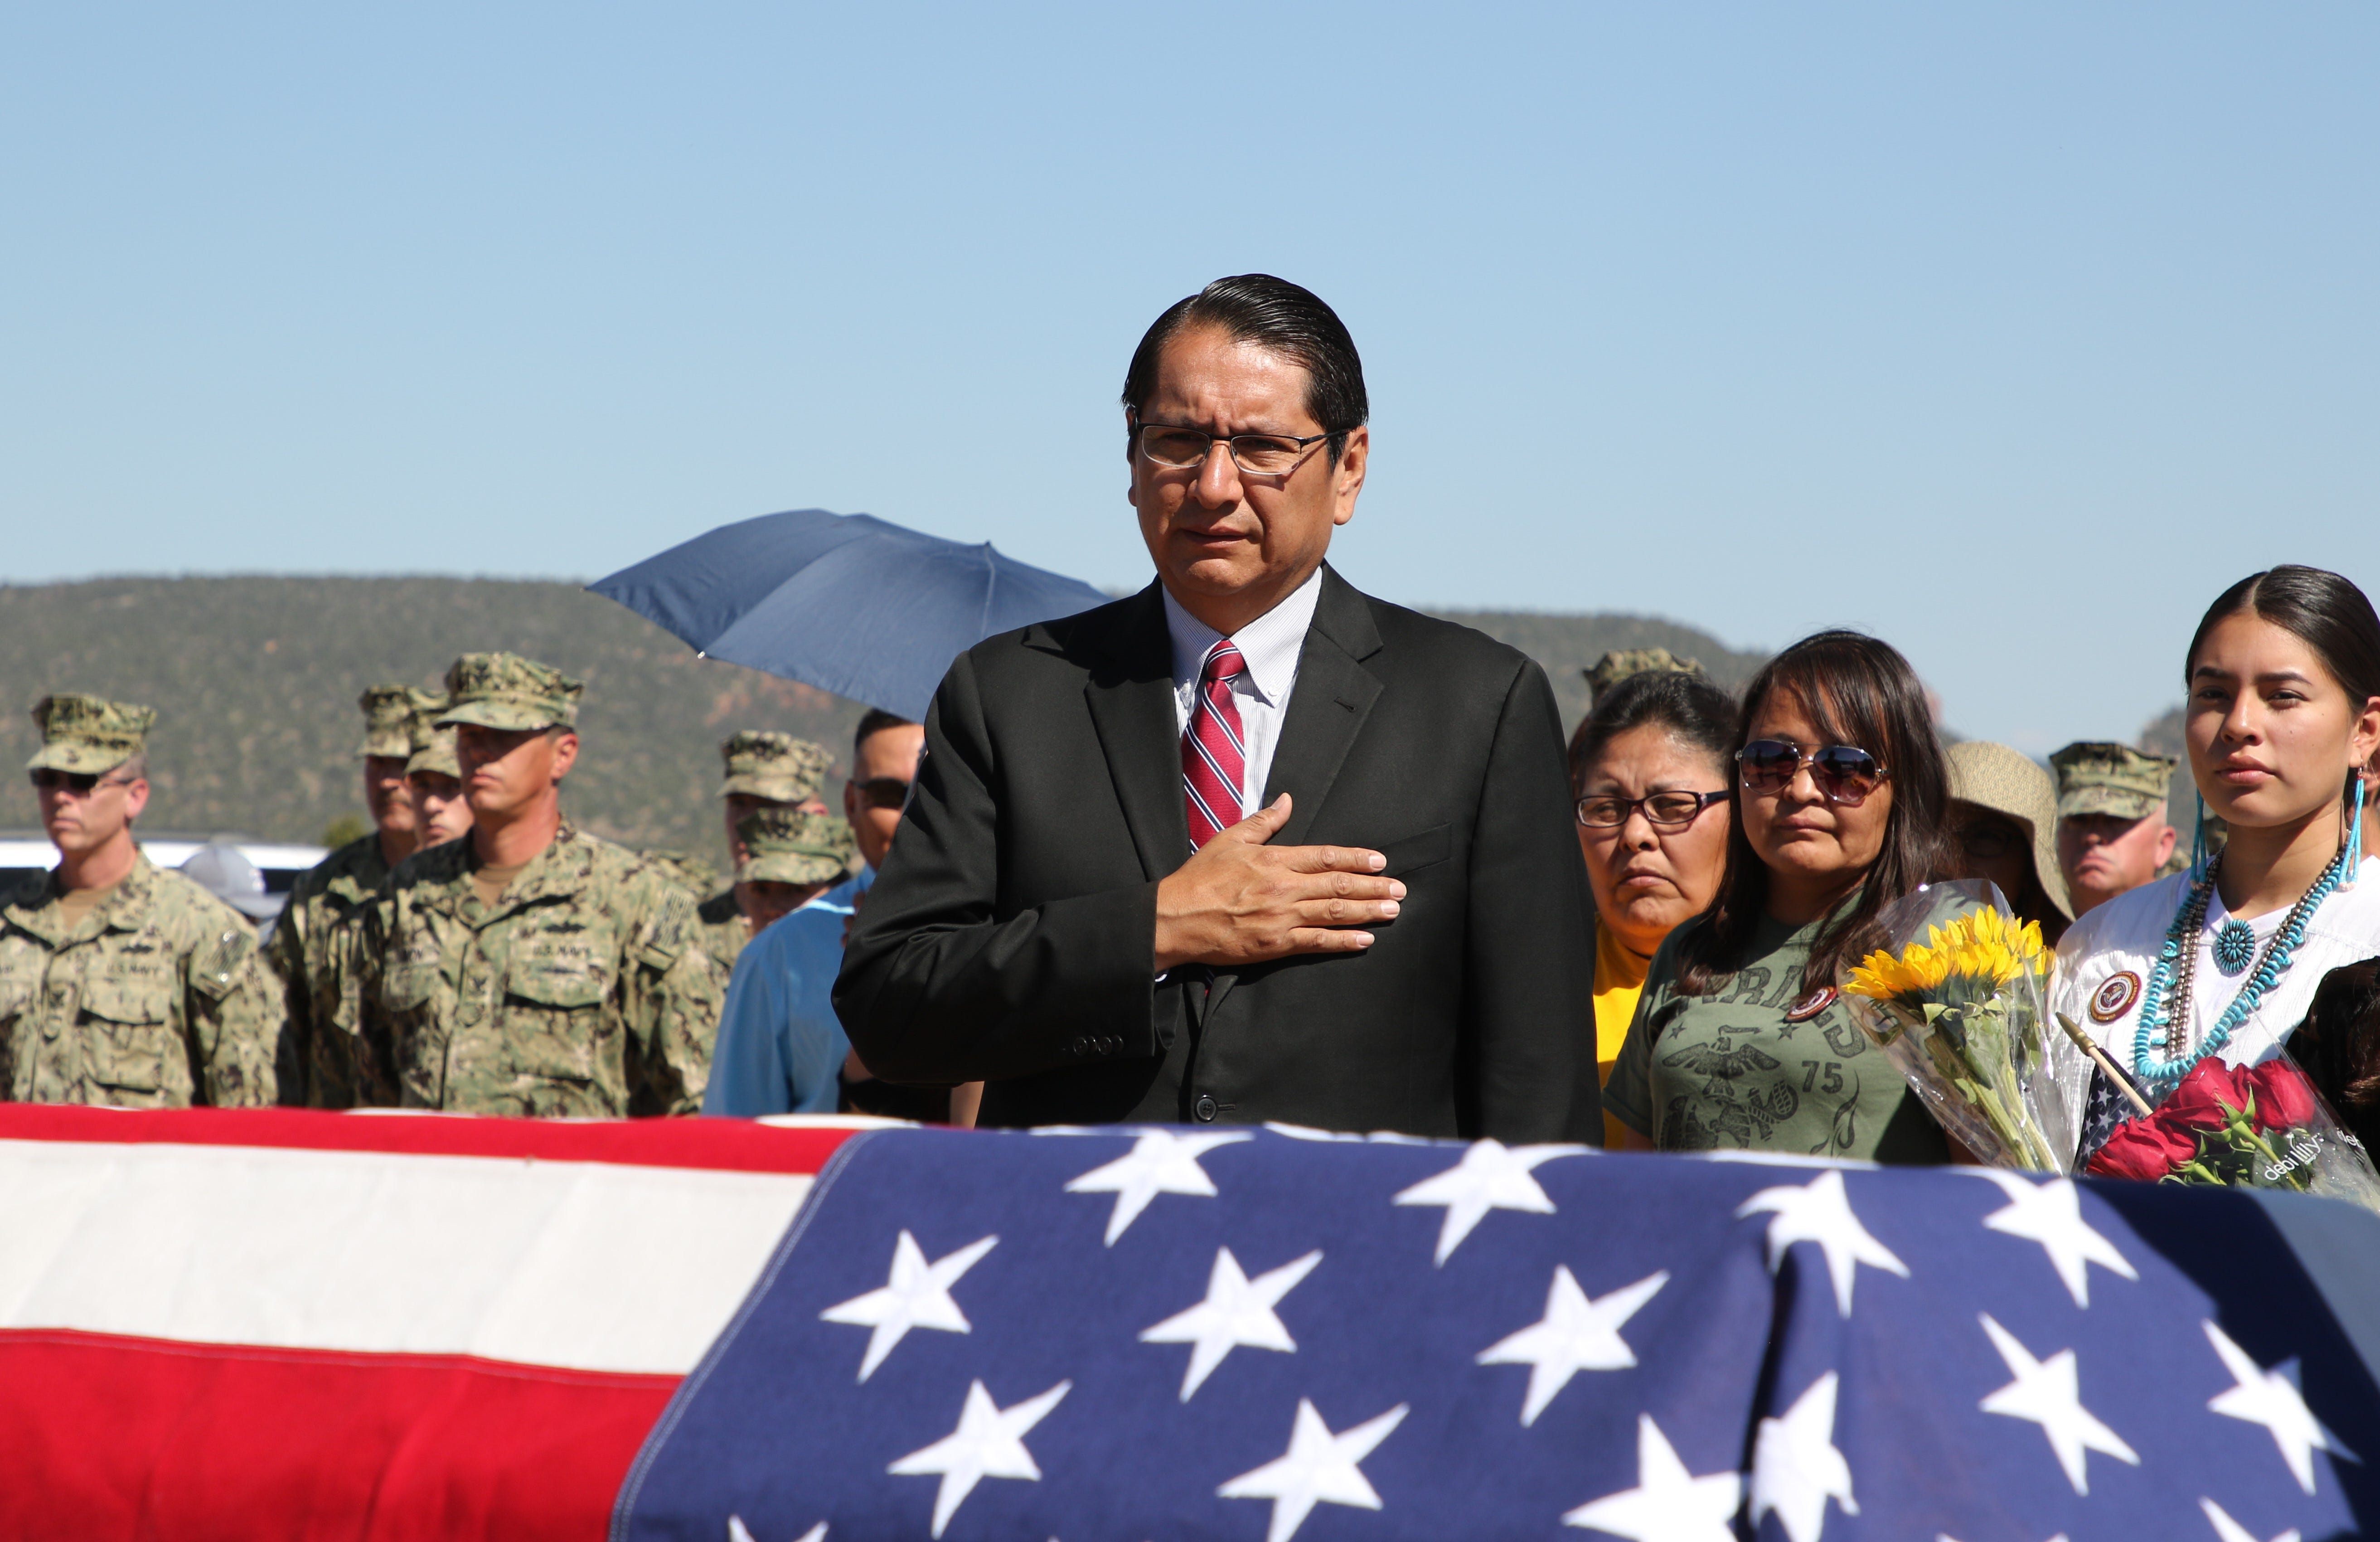 Navajo Nation President Jonathan Nez pays his respects to Navajo Code Talker William Tully Brown Sr. during the June 6 memorial service at the Fort Defiance Veterans Cemetery in Fort Defiance, Ariz.